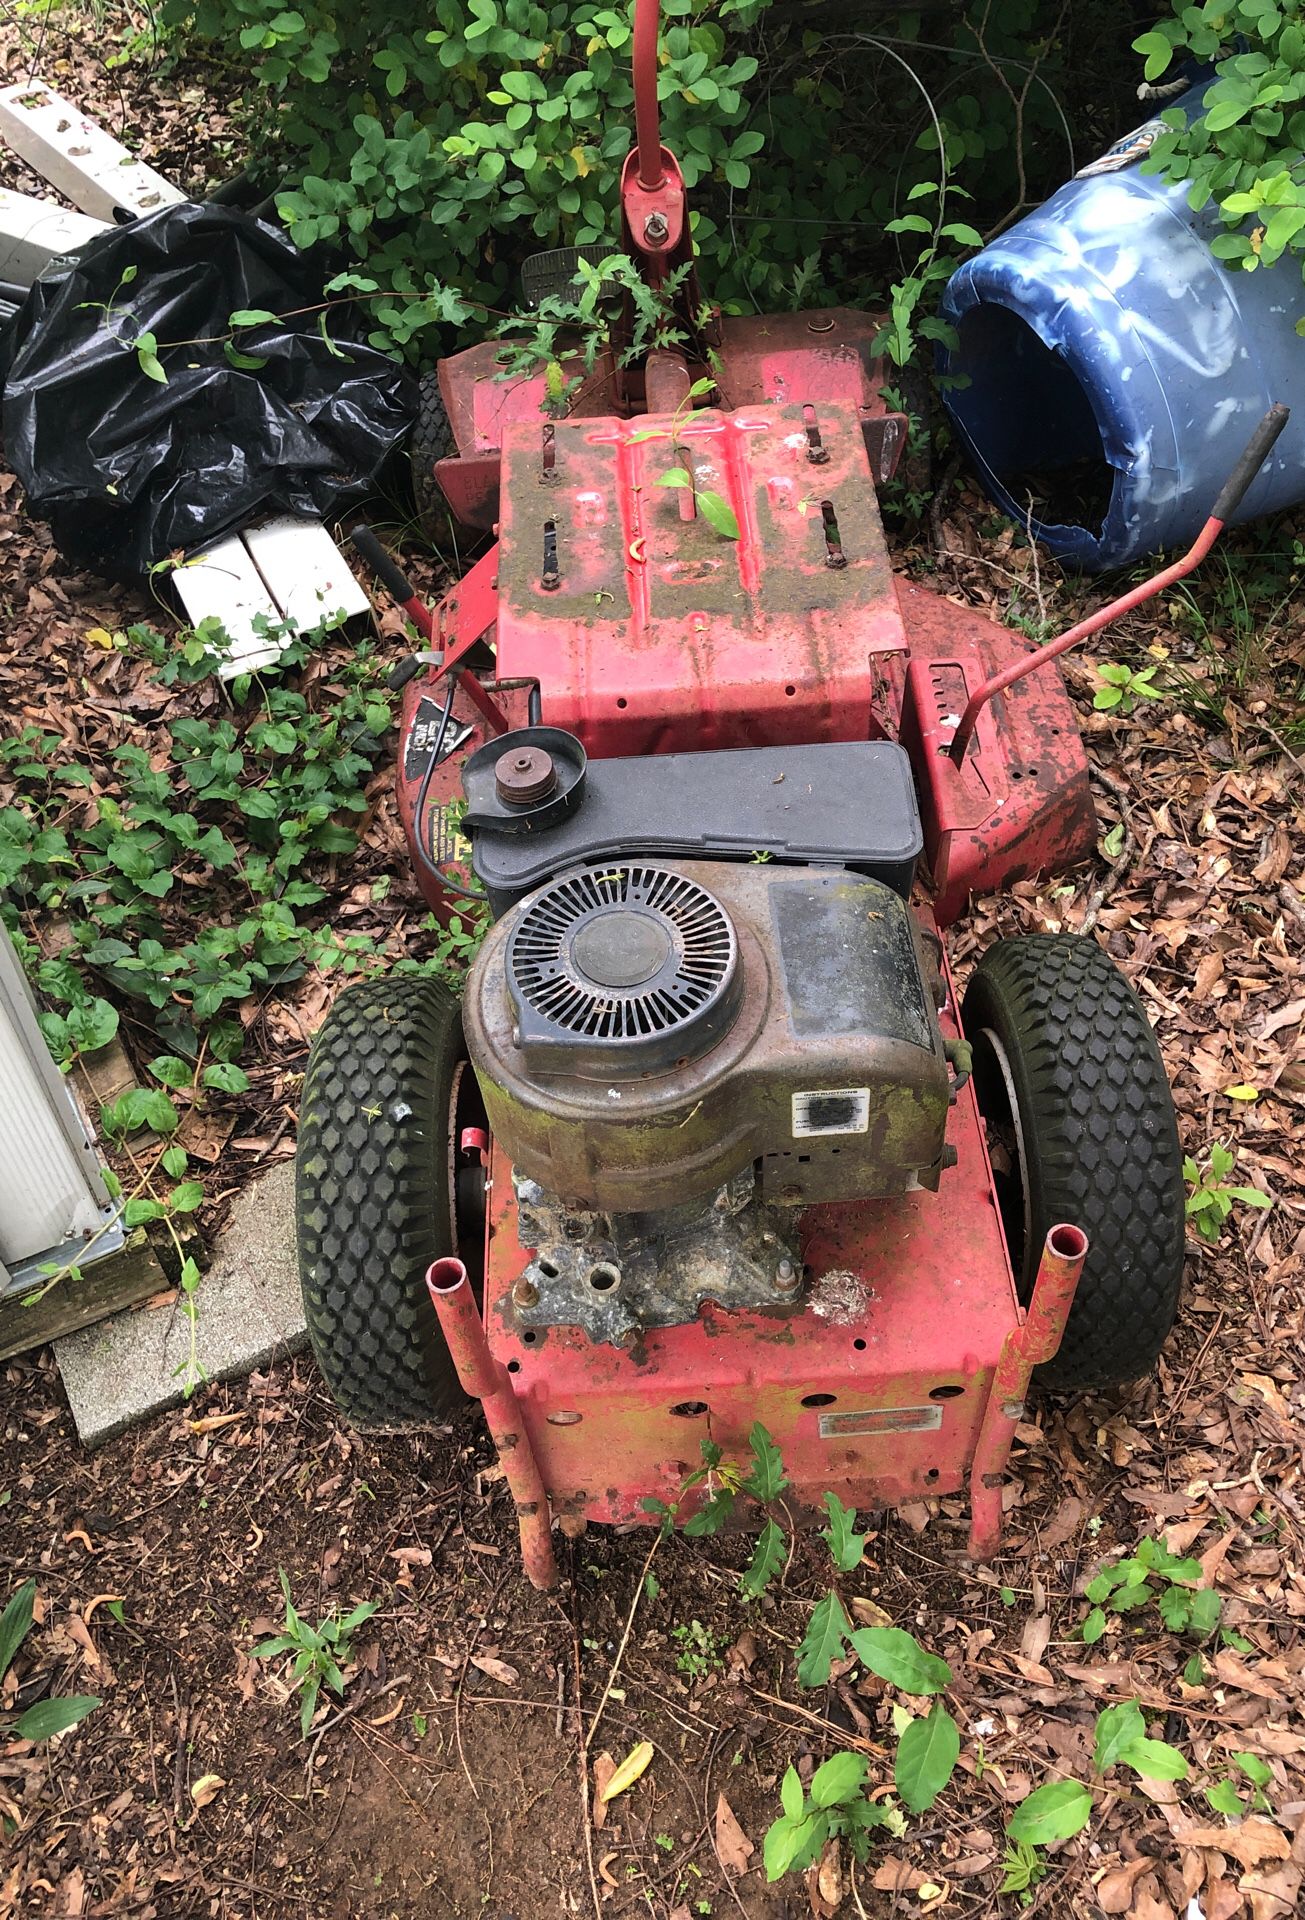 Old snapper riding lawn mower